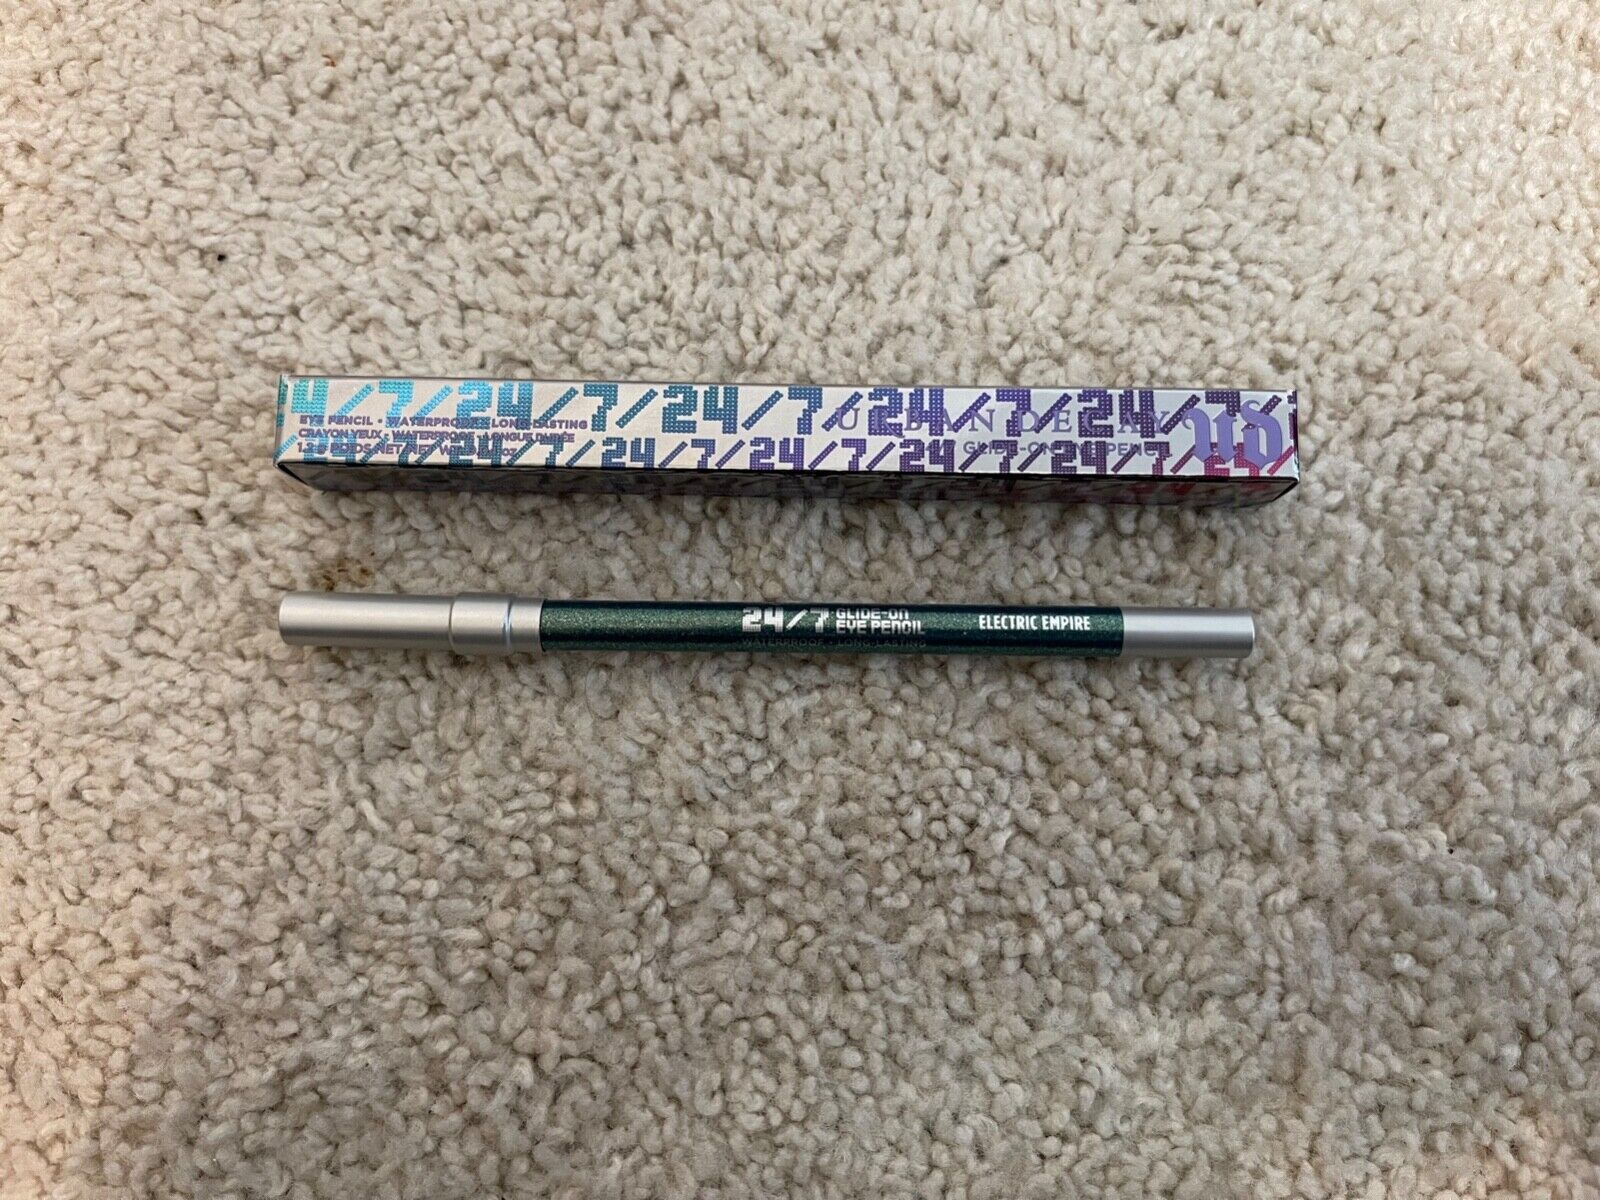 Primary image for NIB UD Urban Decay 24/7 Waterproof Glide-on Eye Pencil Electric Empire Full Size